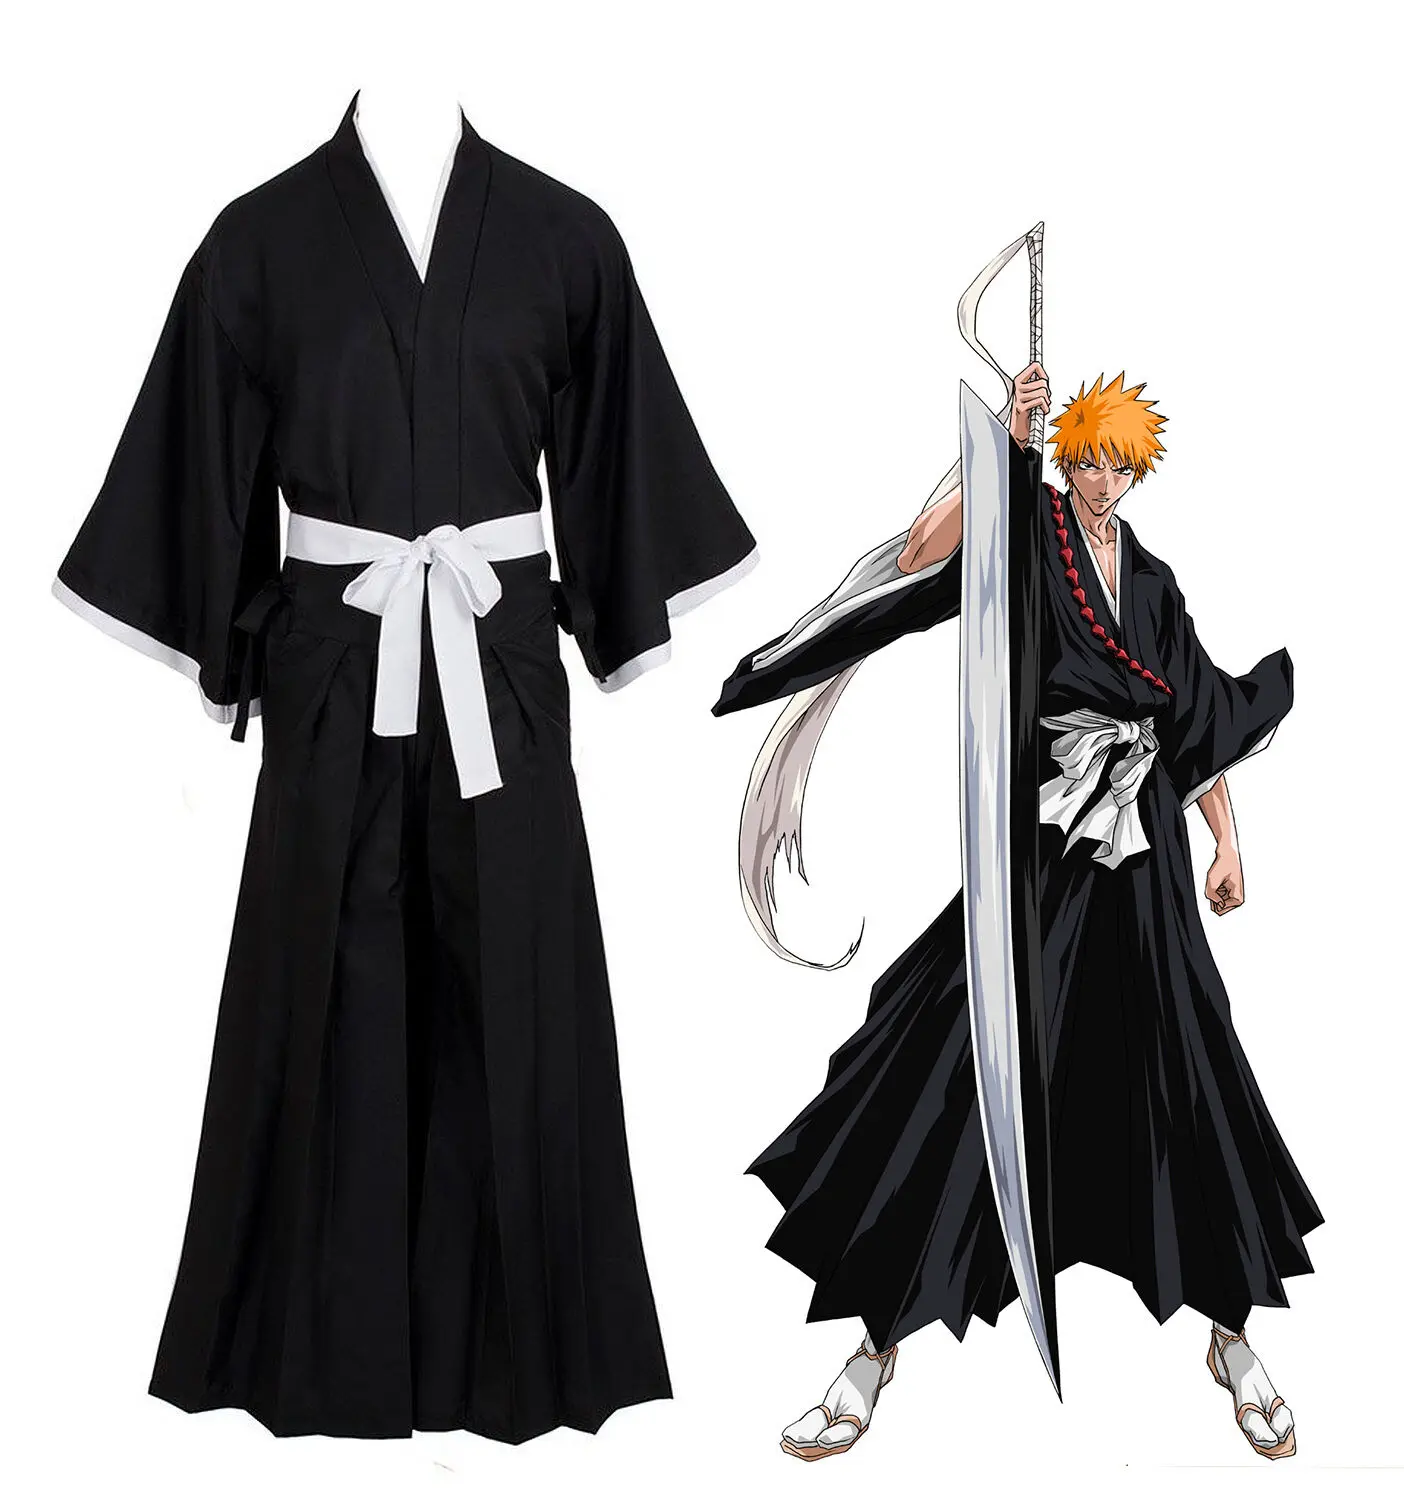 Online Anime Bleach Cosplay Costume Fancy Clothes Deluxe Death Kuchiki  Rukia Japanese Kimono Costume - Buy Costume,Designer Bleach Cosplay Costumes,Carnival/halloween  Japanese Nude Cosplay Costume Product on 